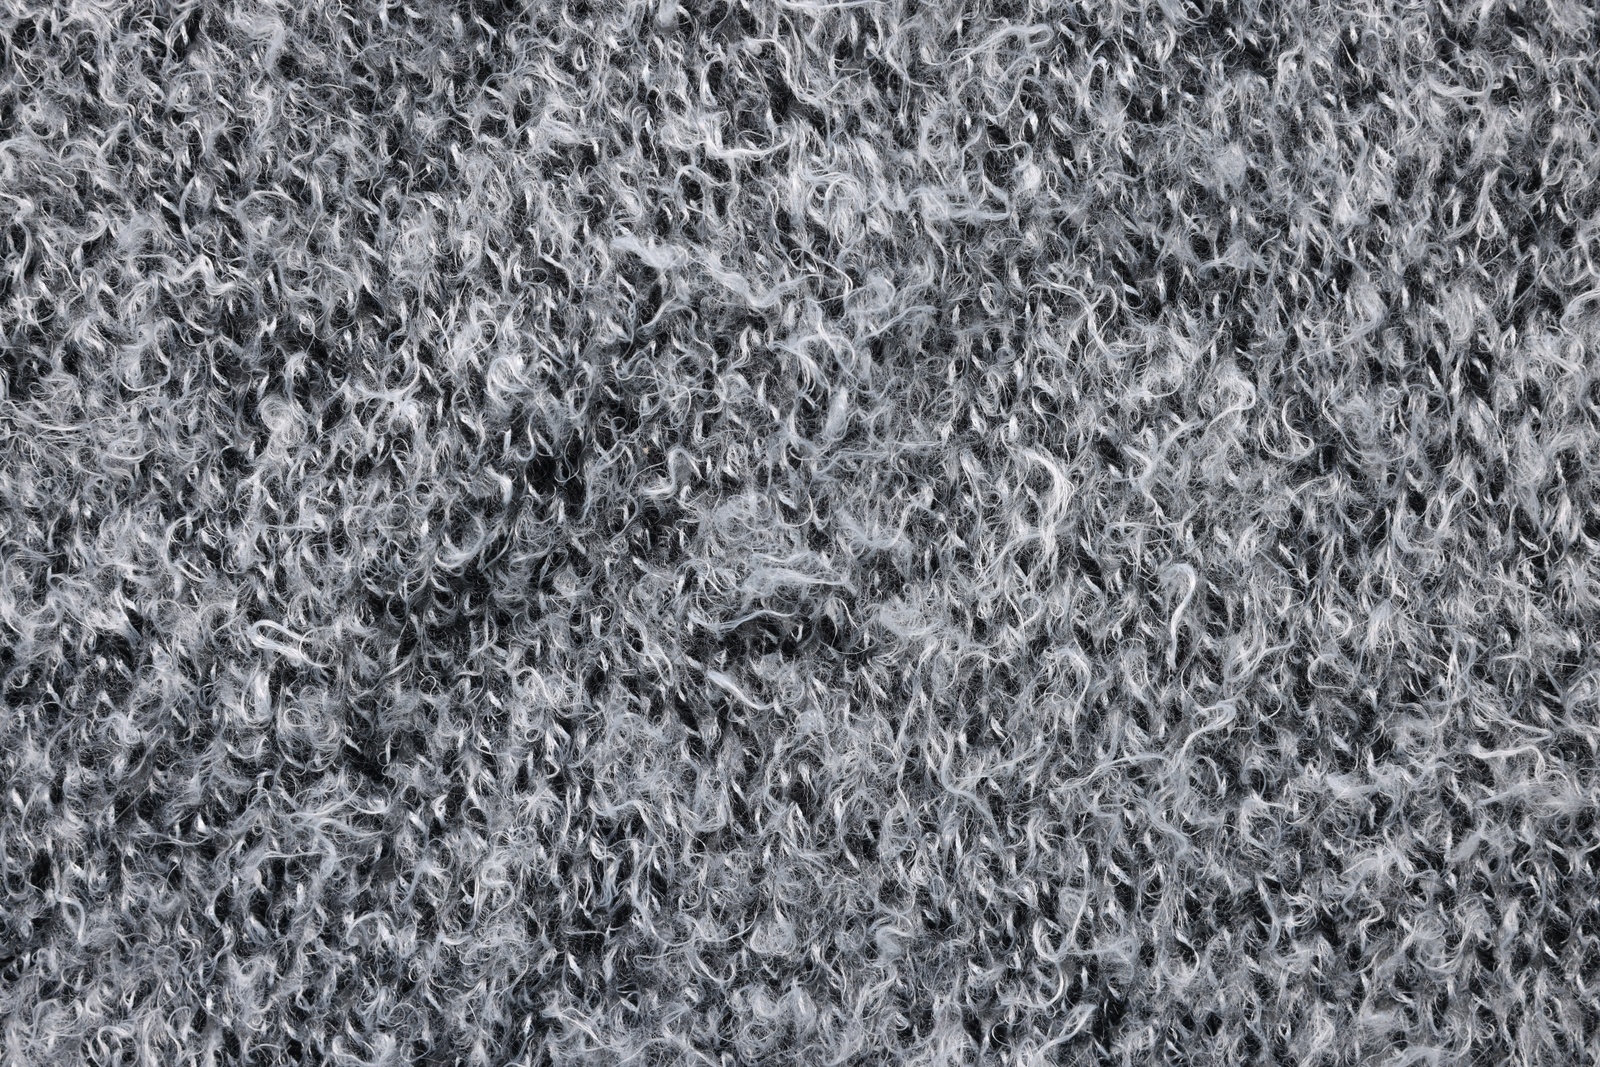 Photo of Texture of soft color fabric as background, top view